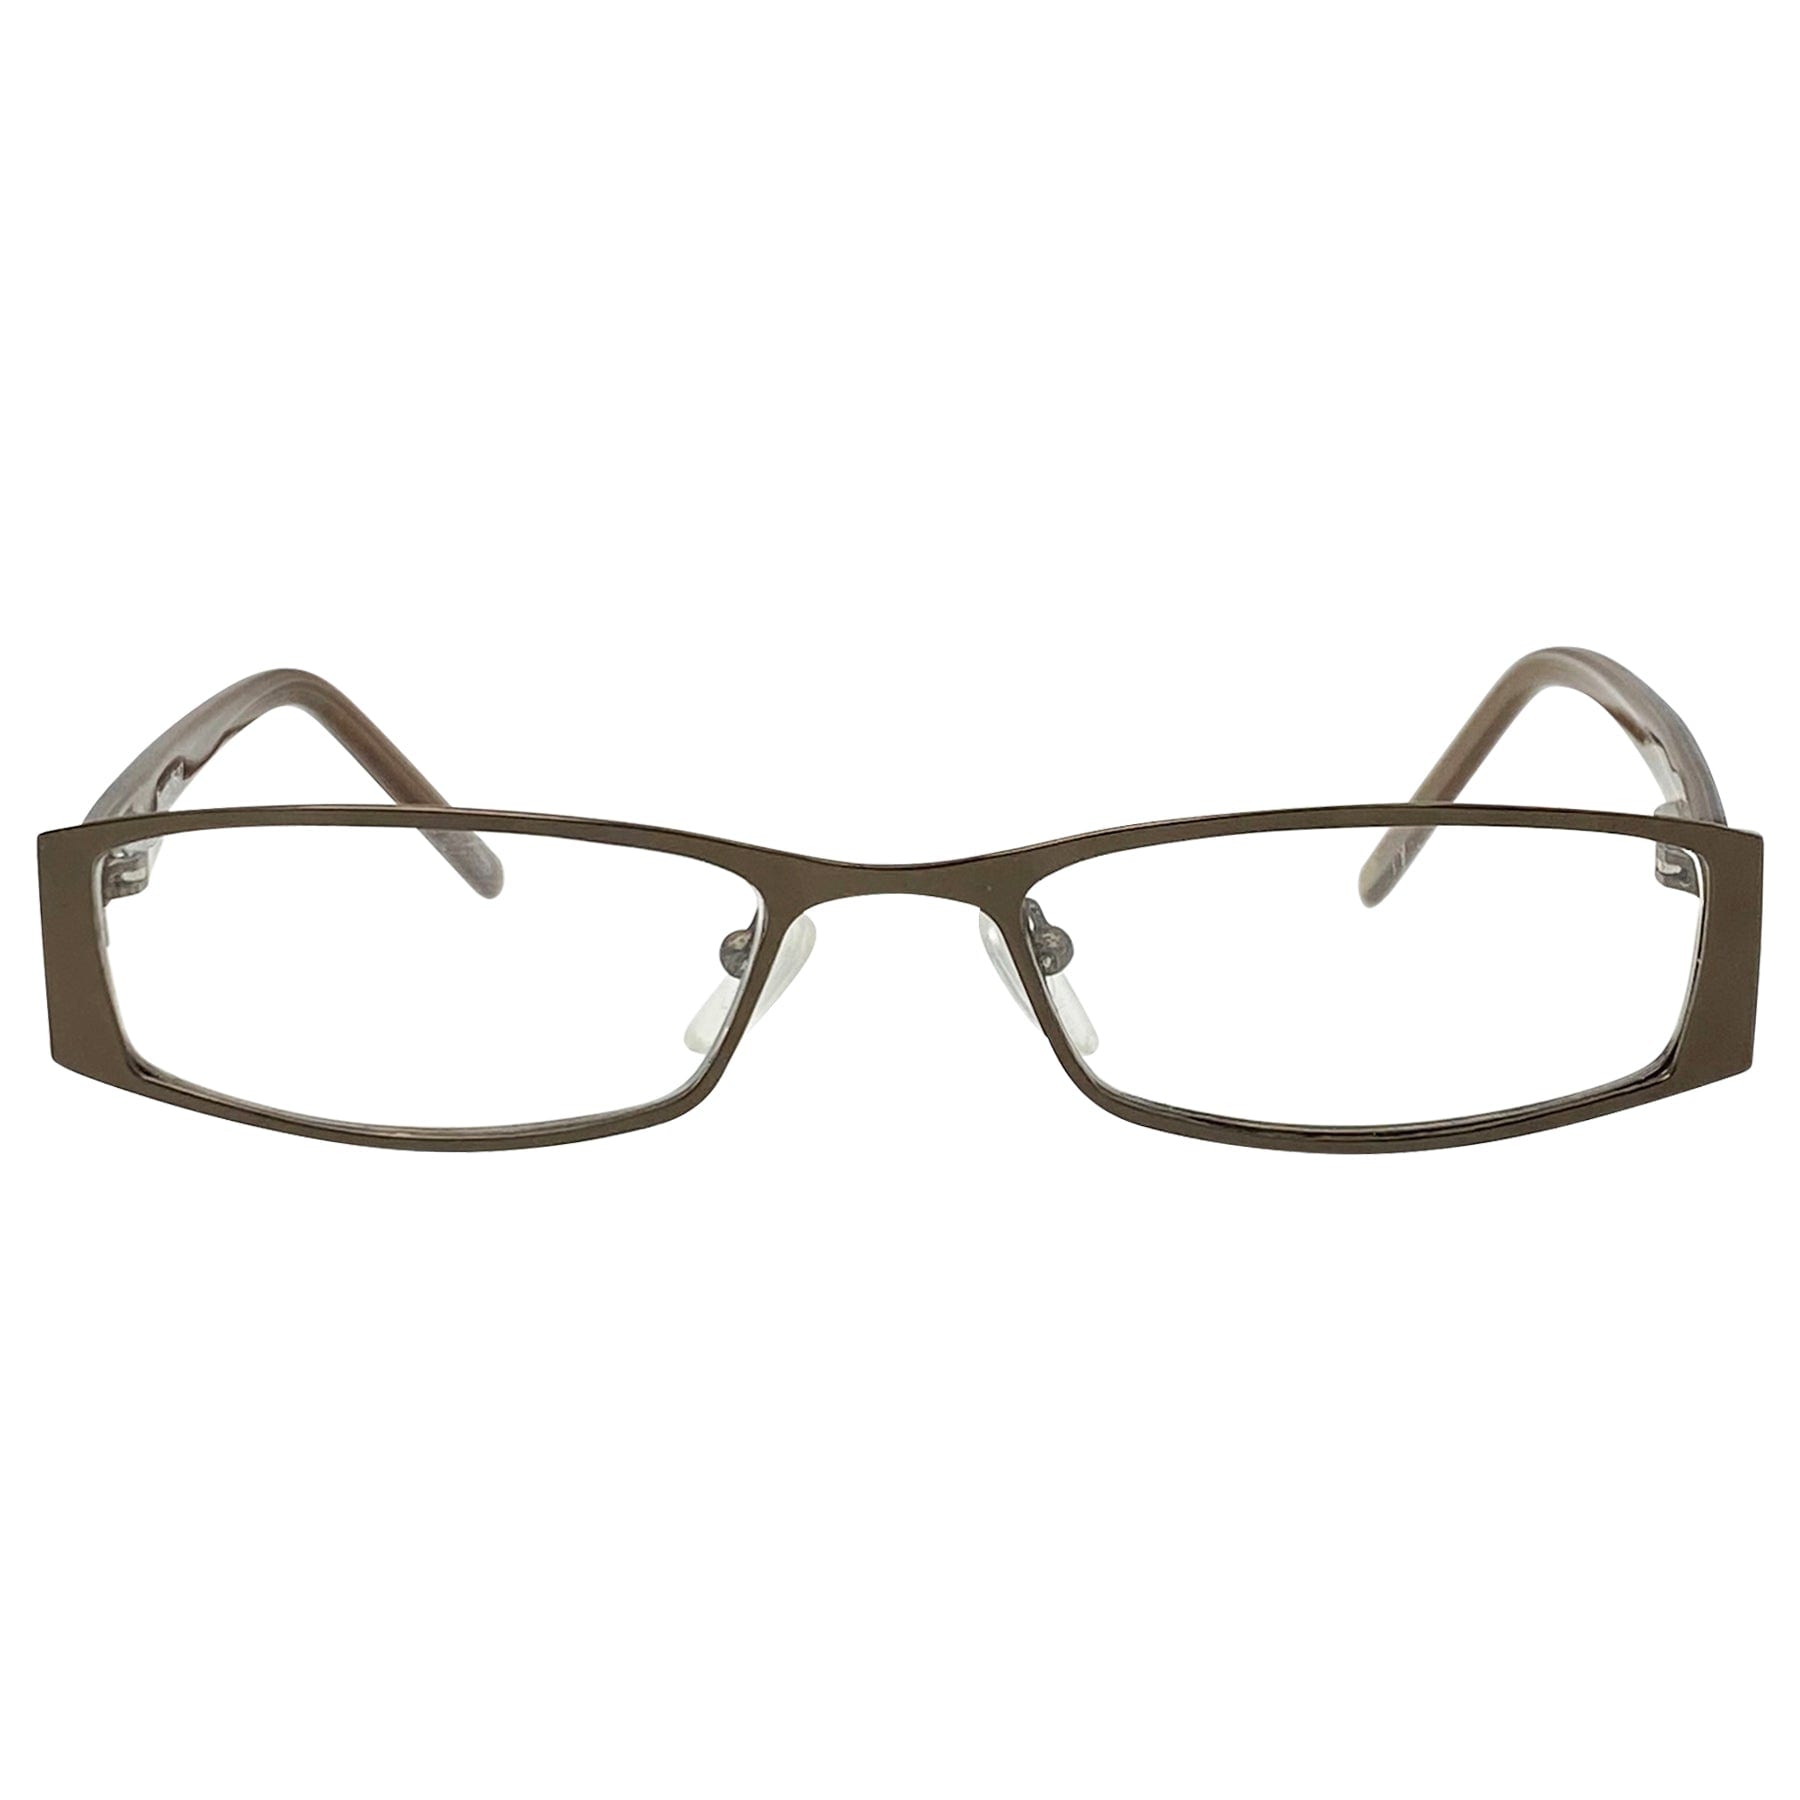 clear fashion glasses with a copper metal frame and a rectangular style